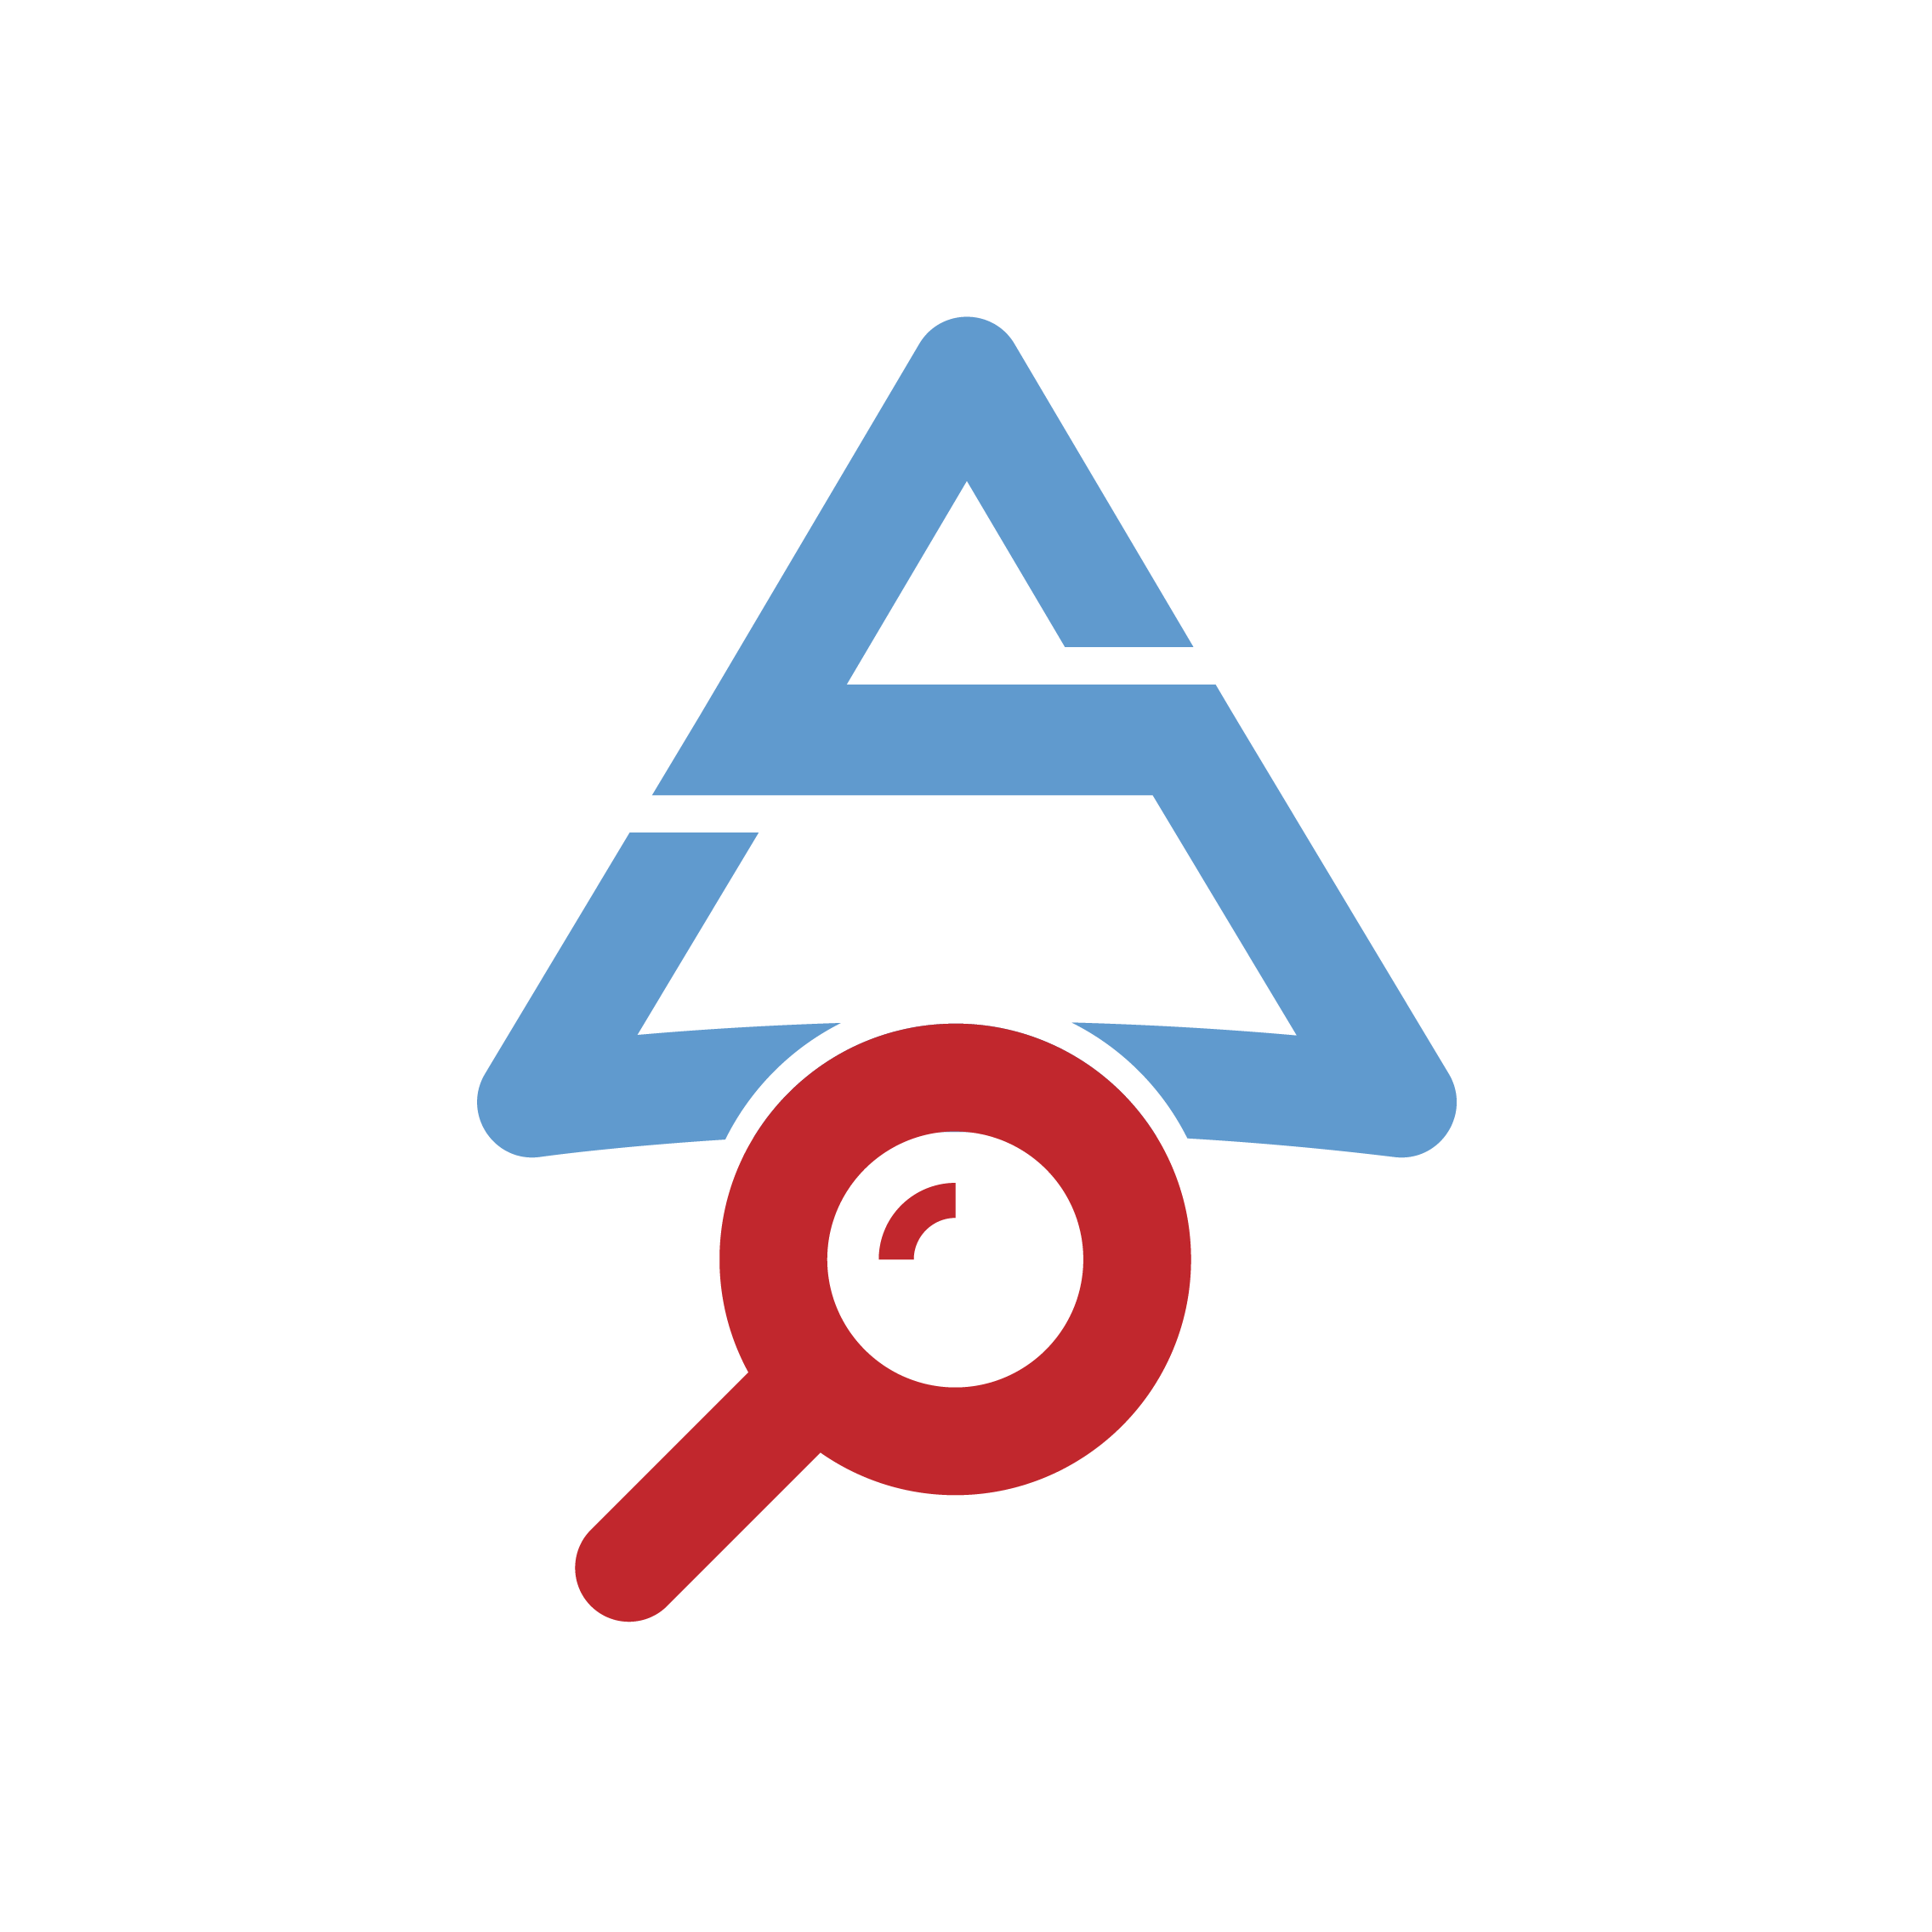 Triangle Skeptics logo – Stylized blue capital letter S in triangle motif with red magnifying glass motif